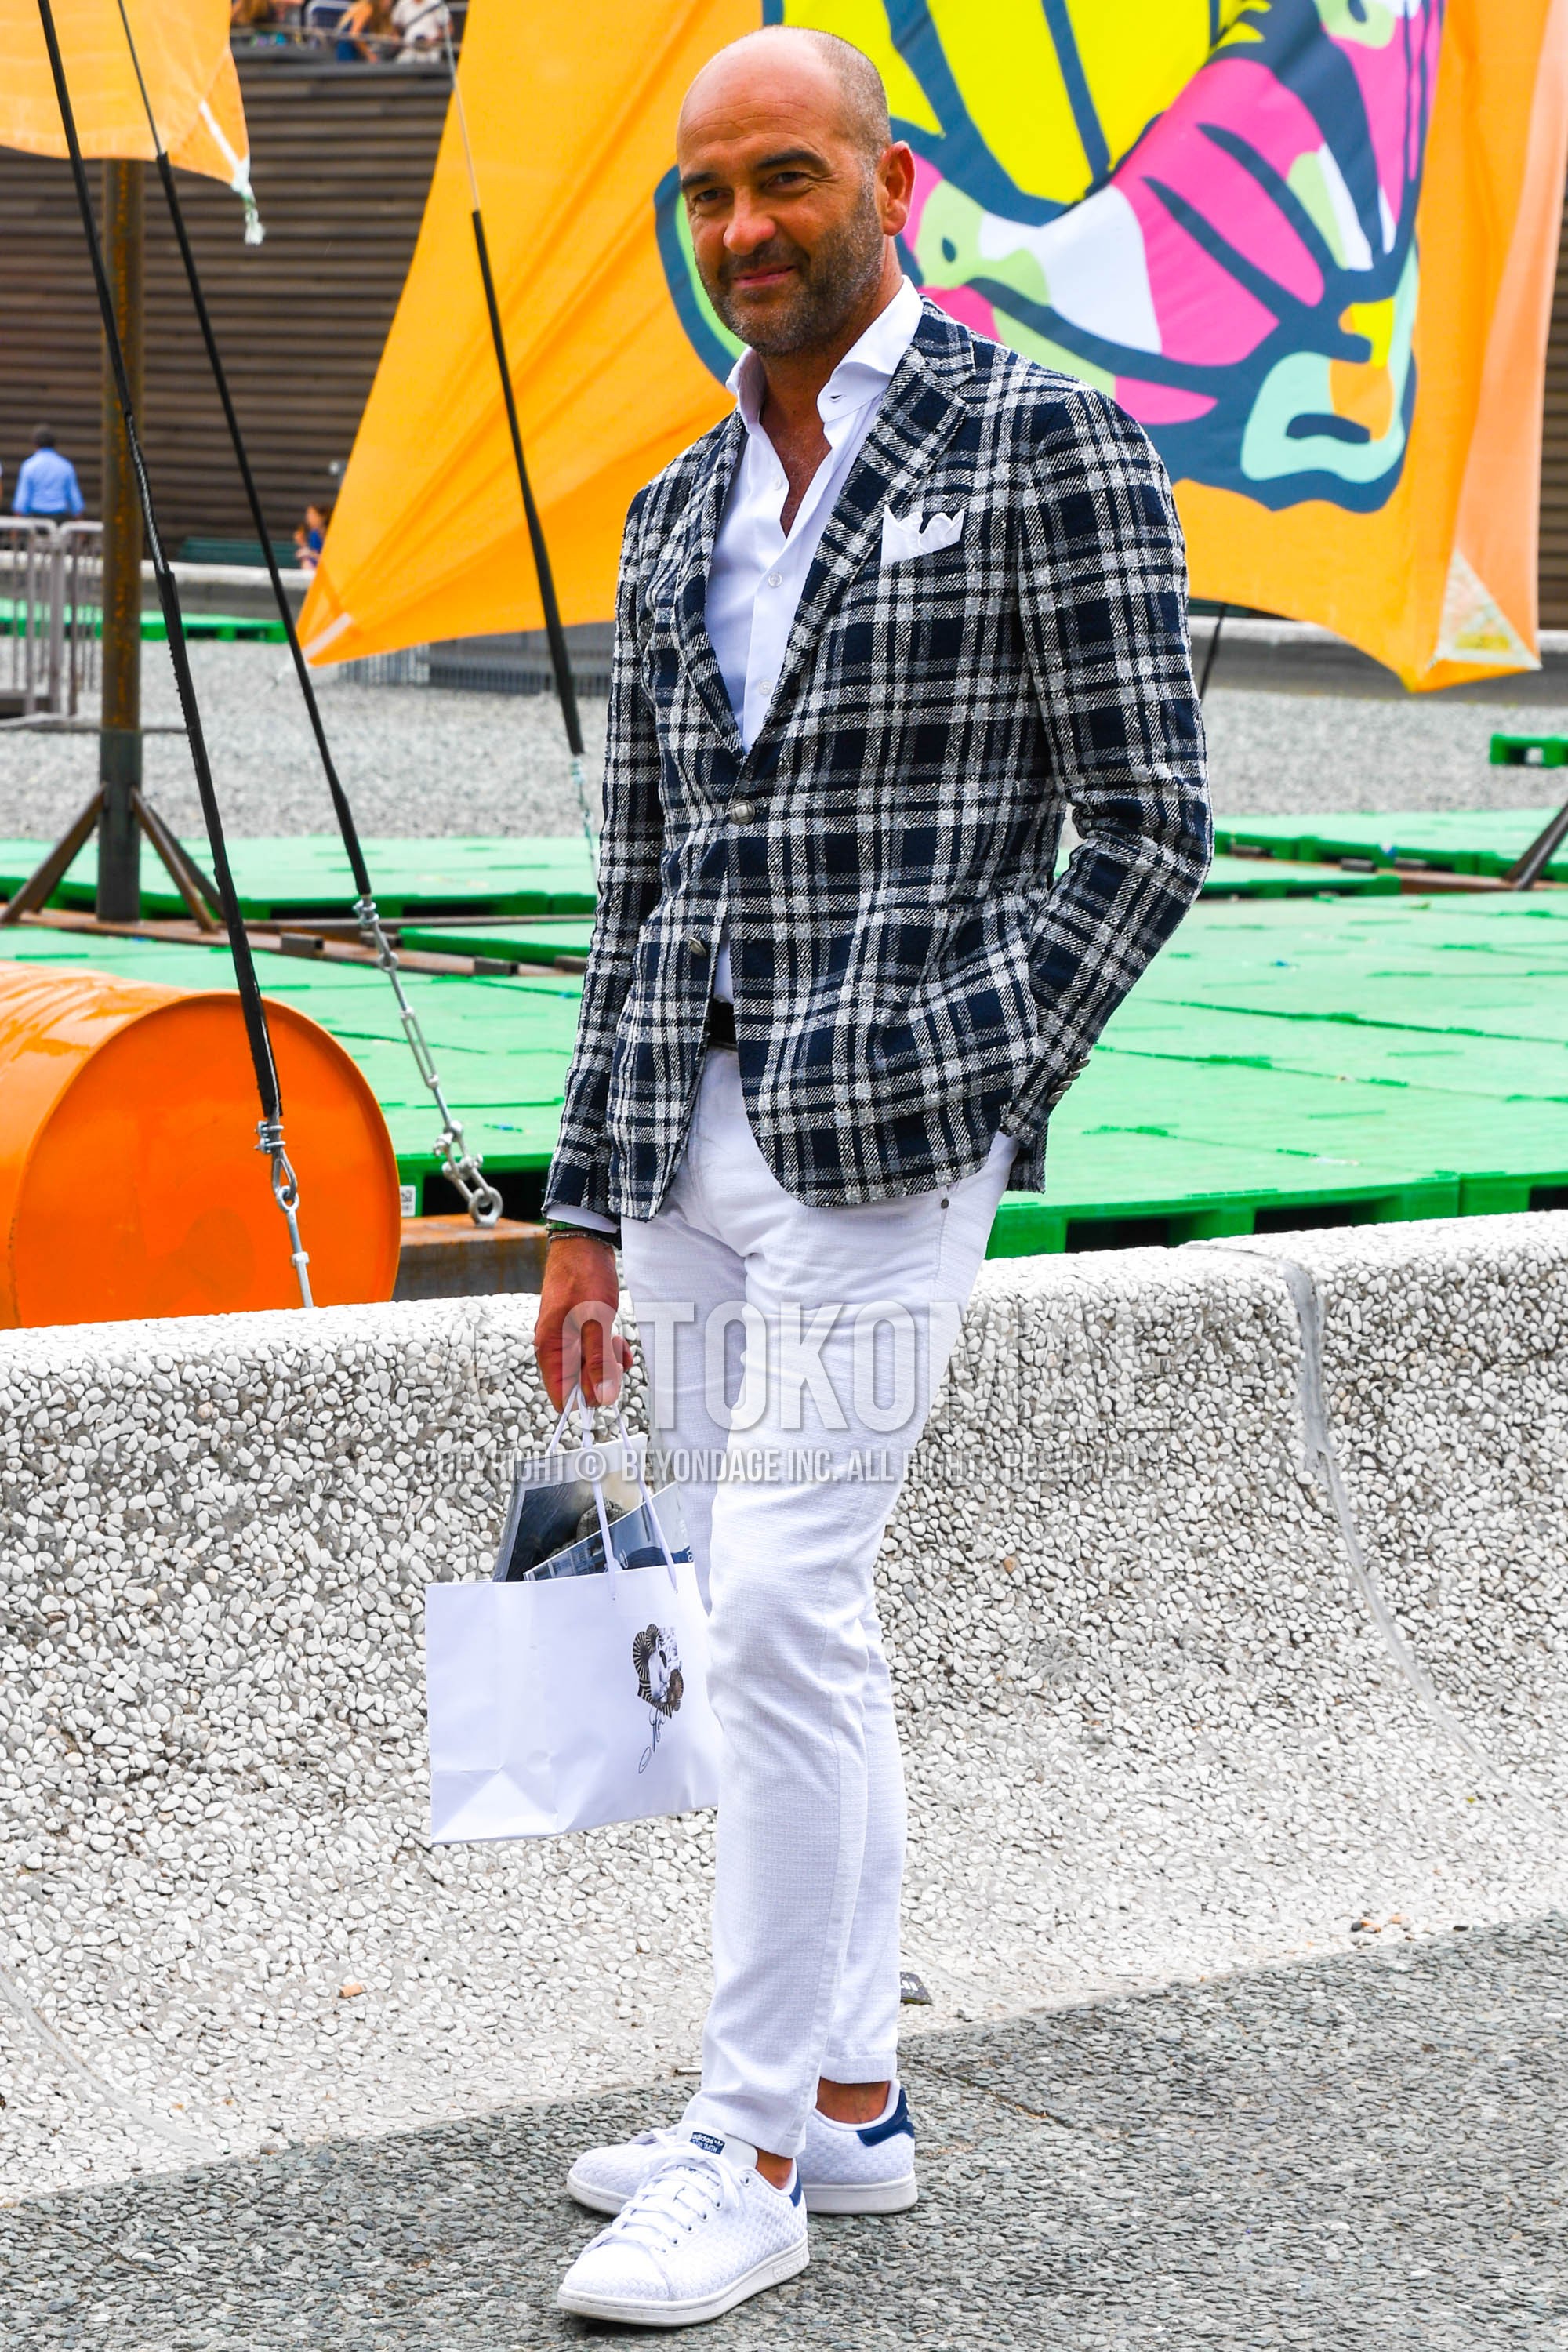 Men's spring summer autumn outfit with navy white check tailored jacket, white plain denim/jeans, white low-cut sneakers.